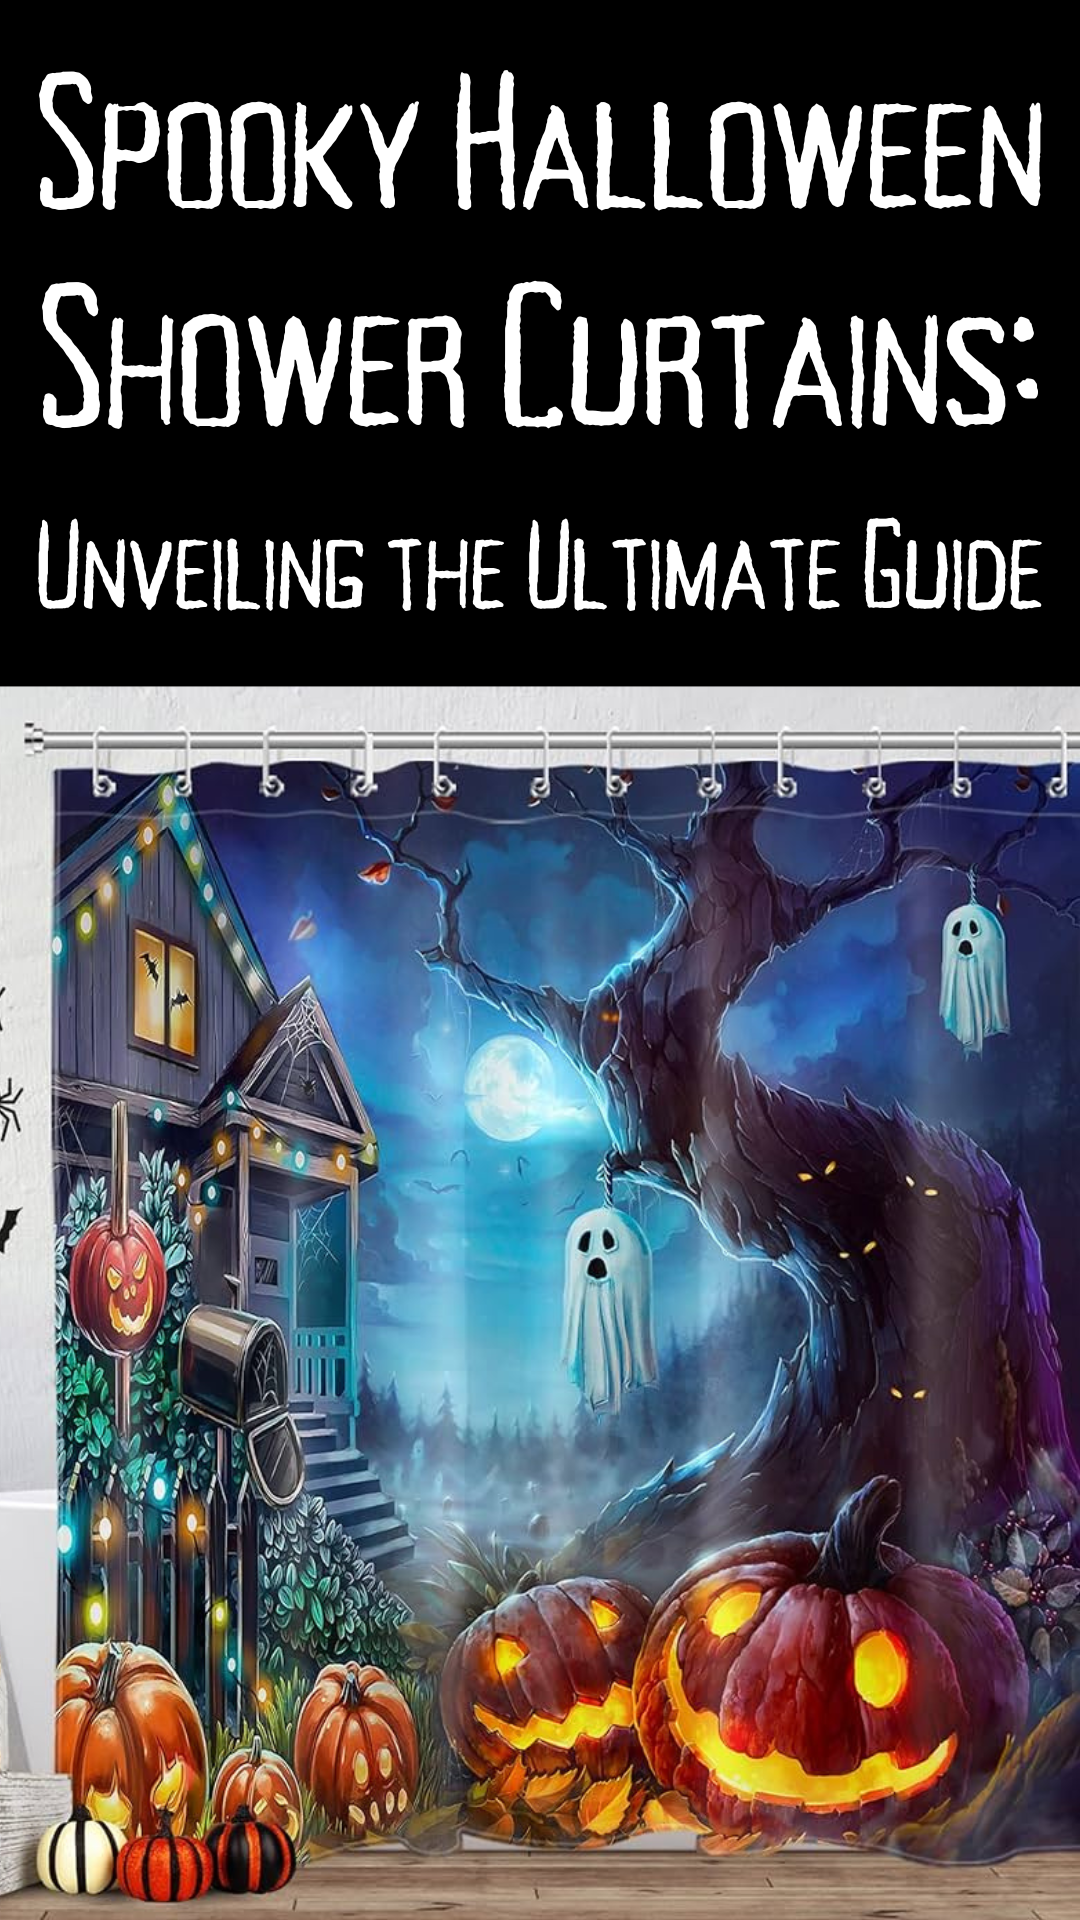 Spooky Halloween Shower Curtains: Unveiling the Ultimate Guide